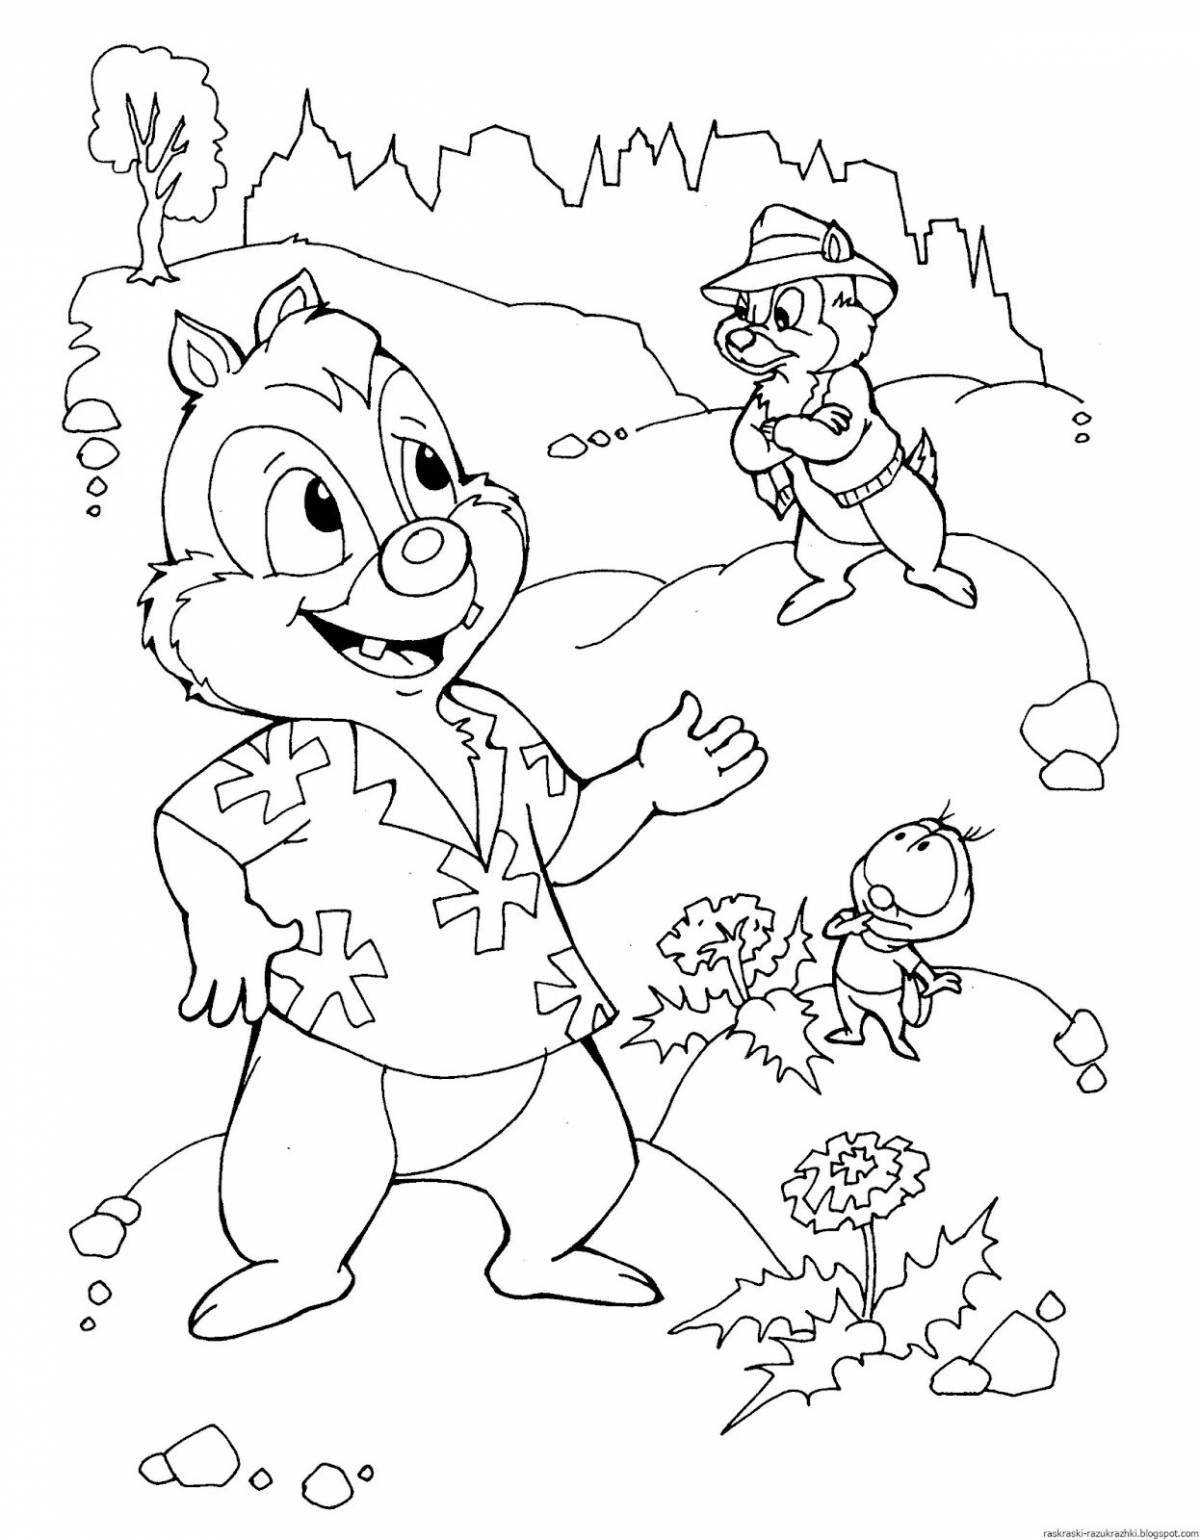 Color-frenzy cartoon coloring pages for kids 6-7 years old